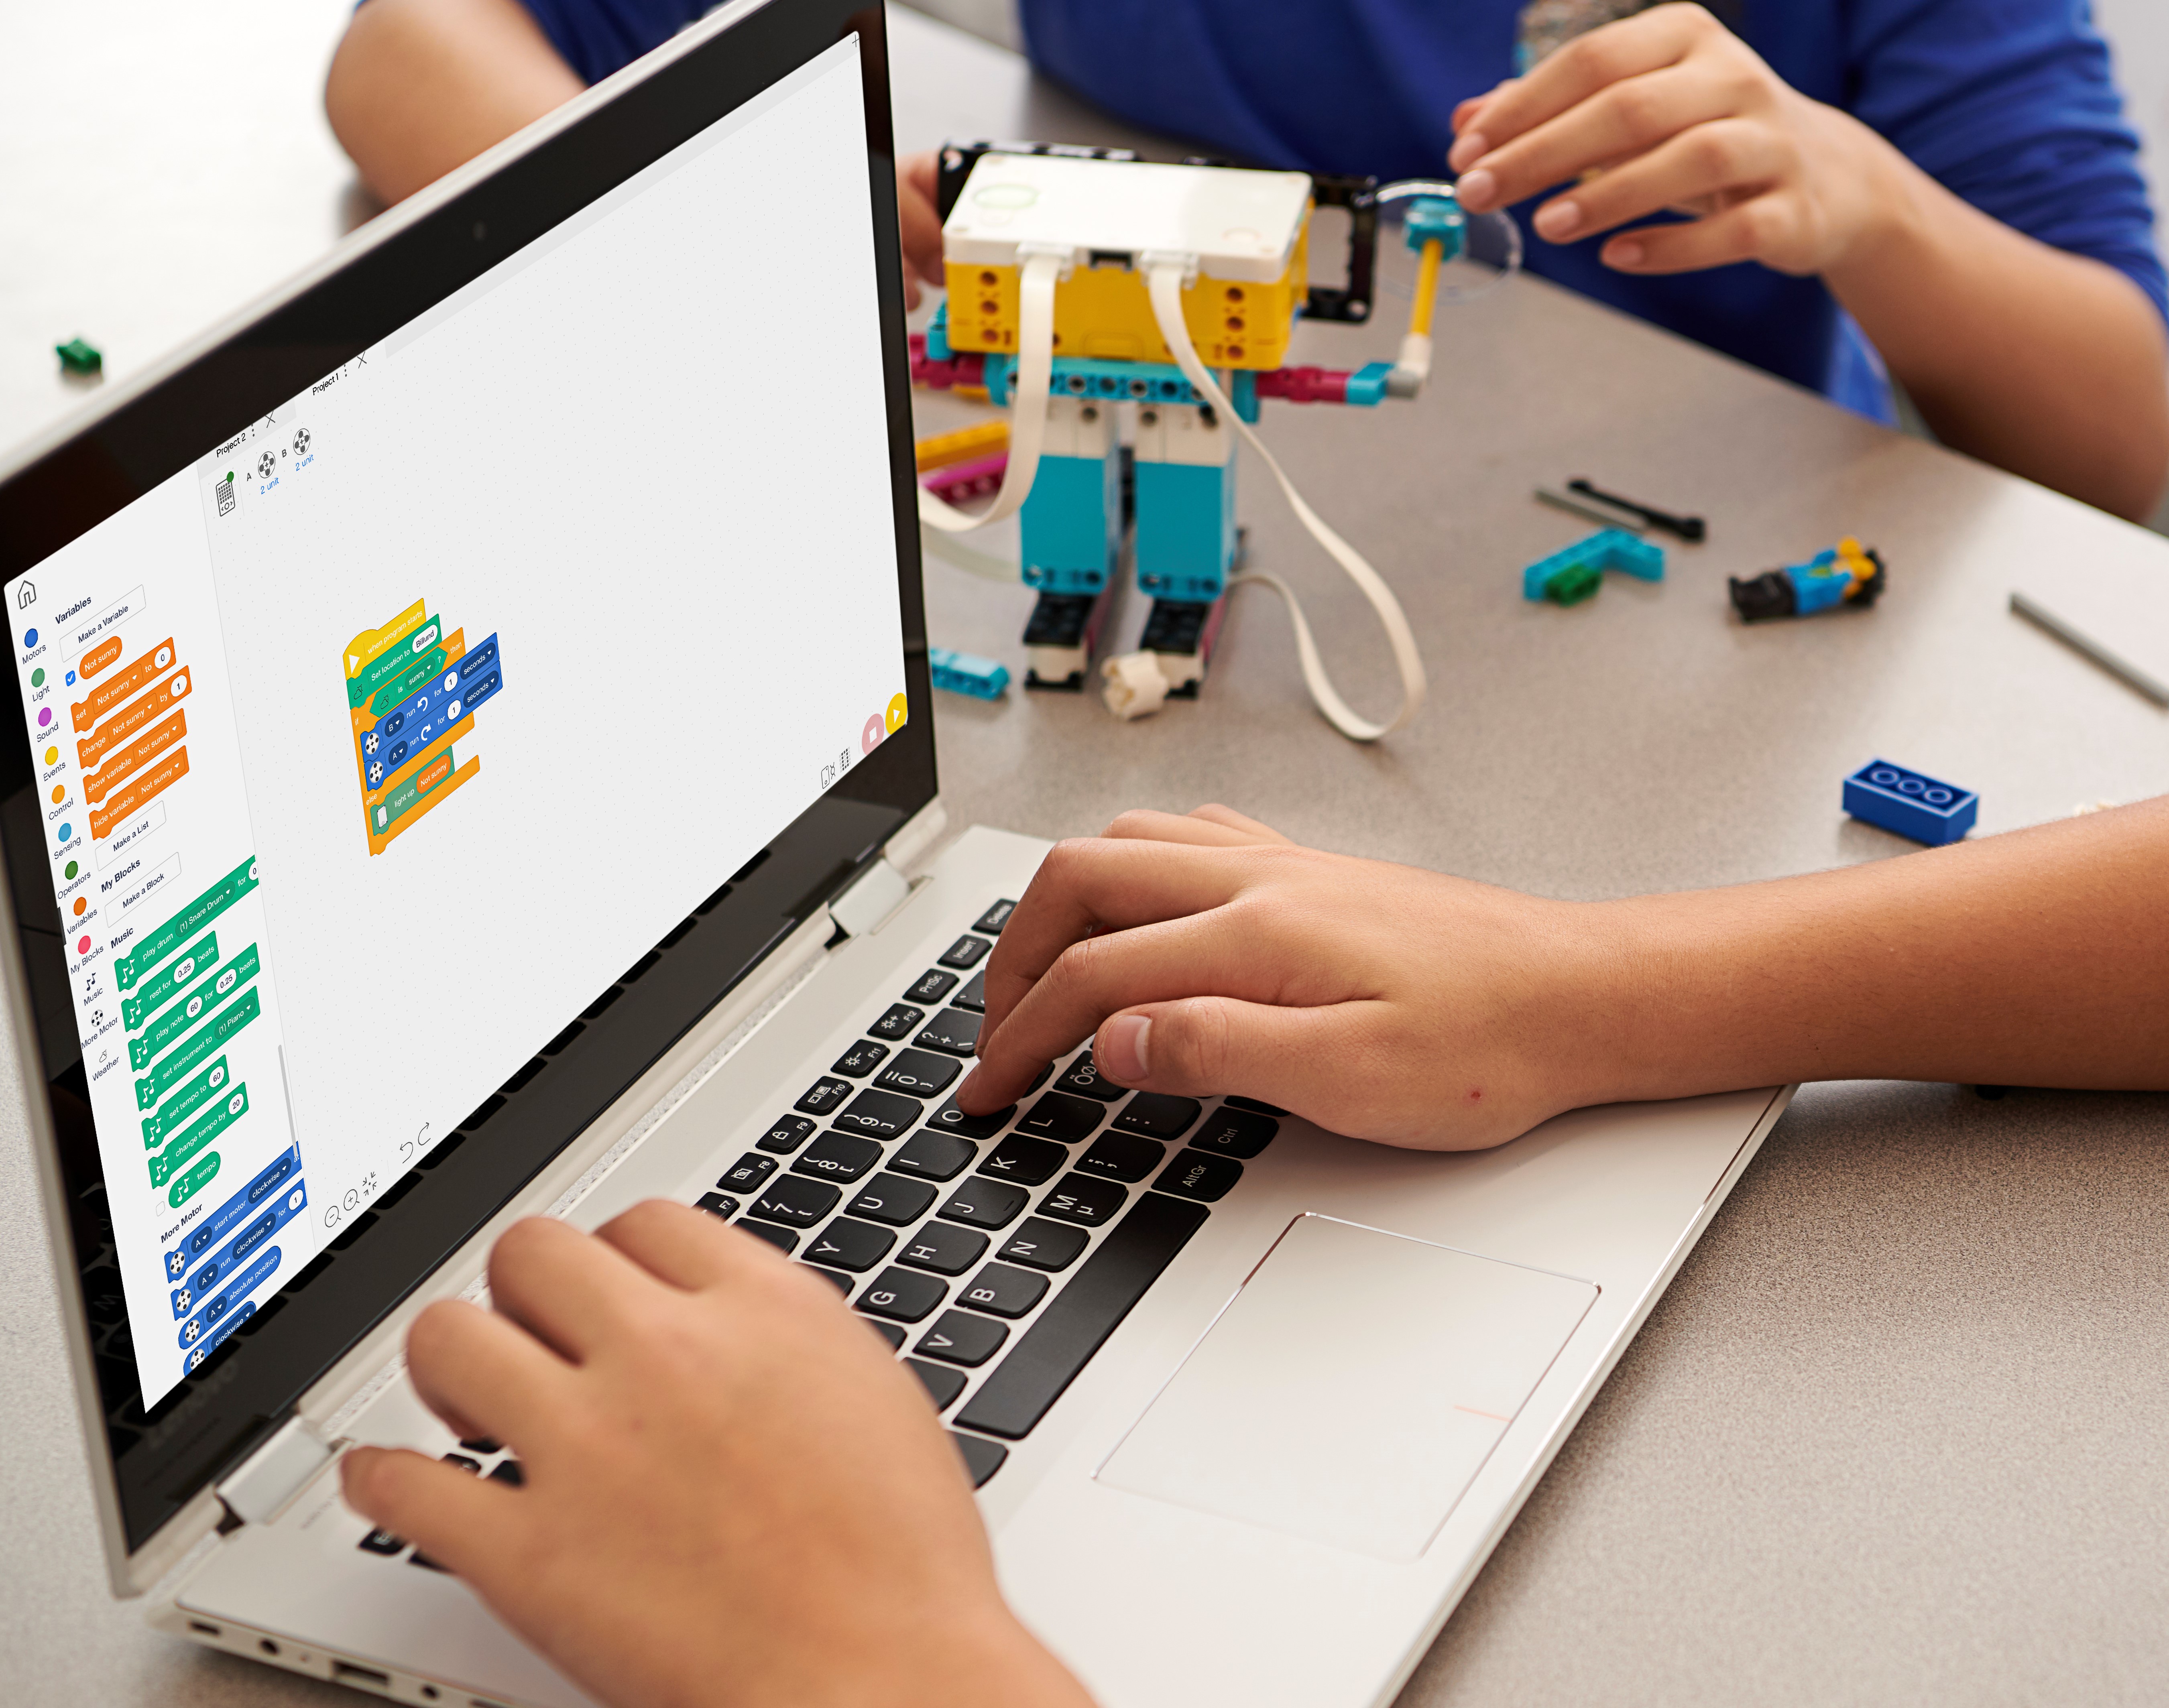 Combining STEAM Education with Playful Exploration